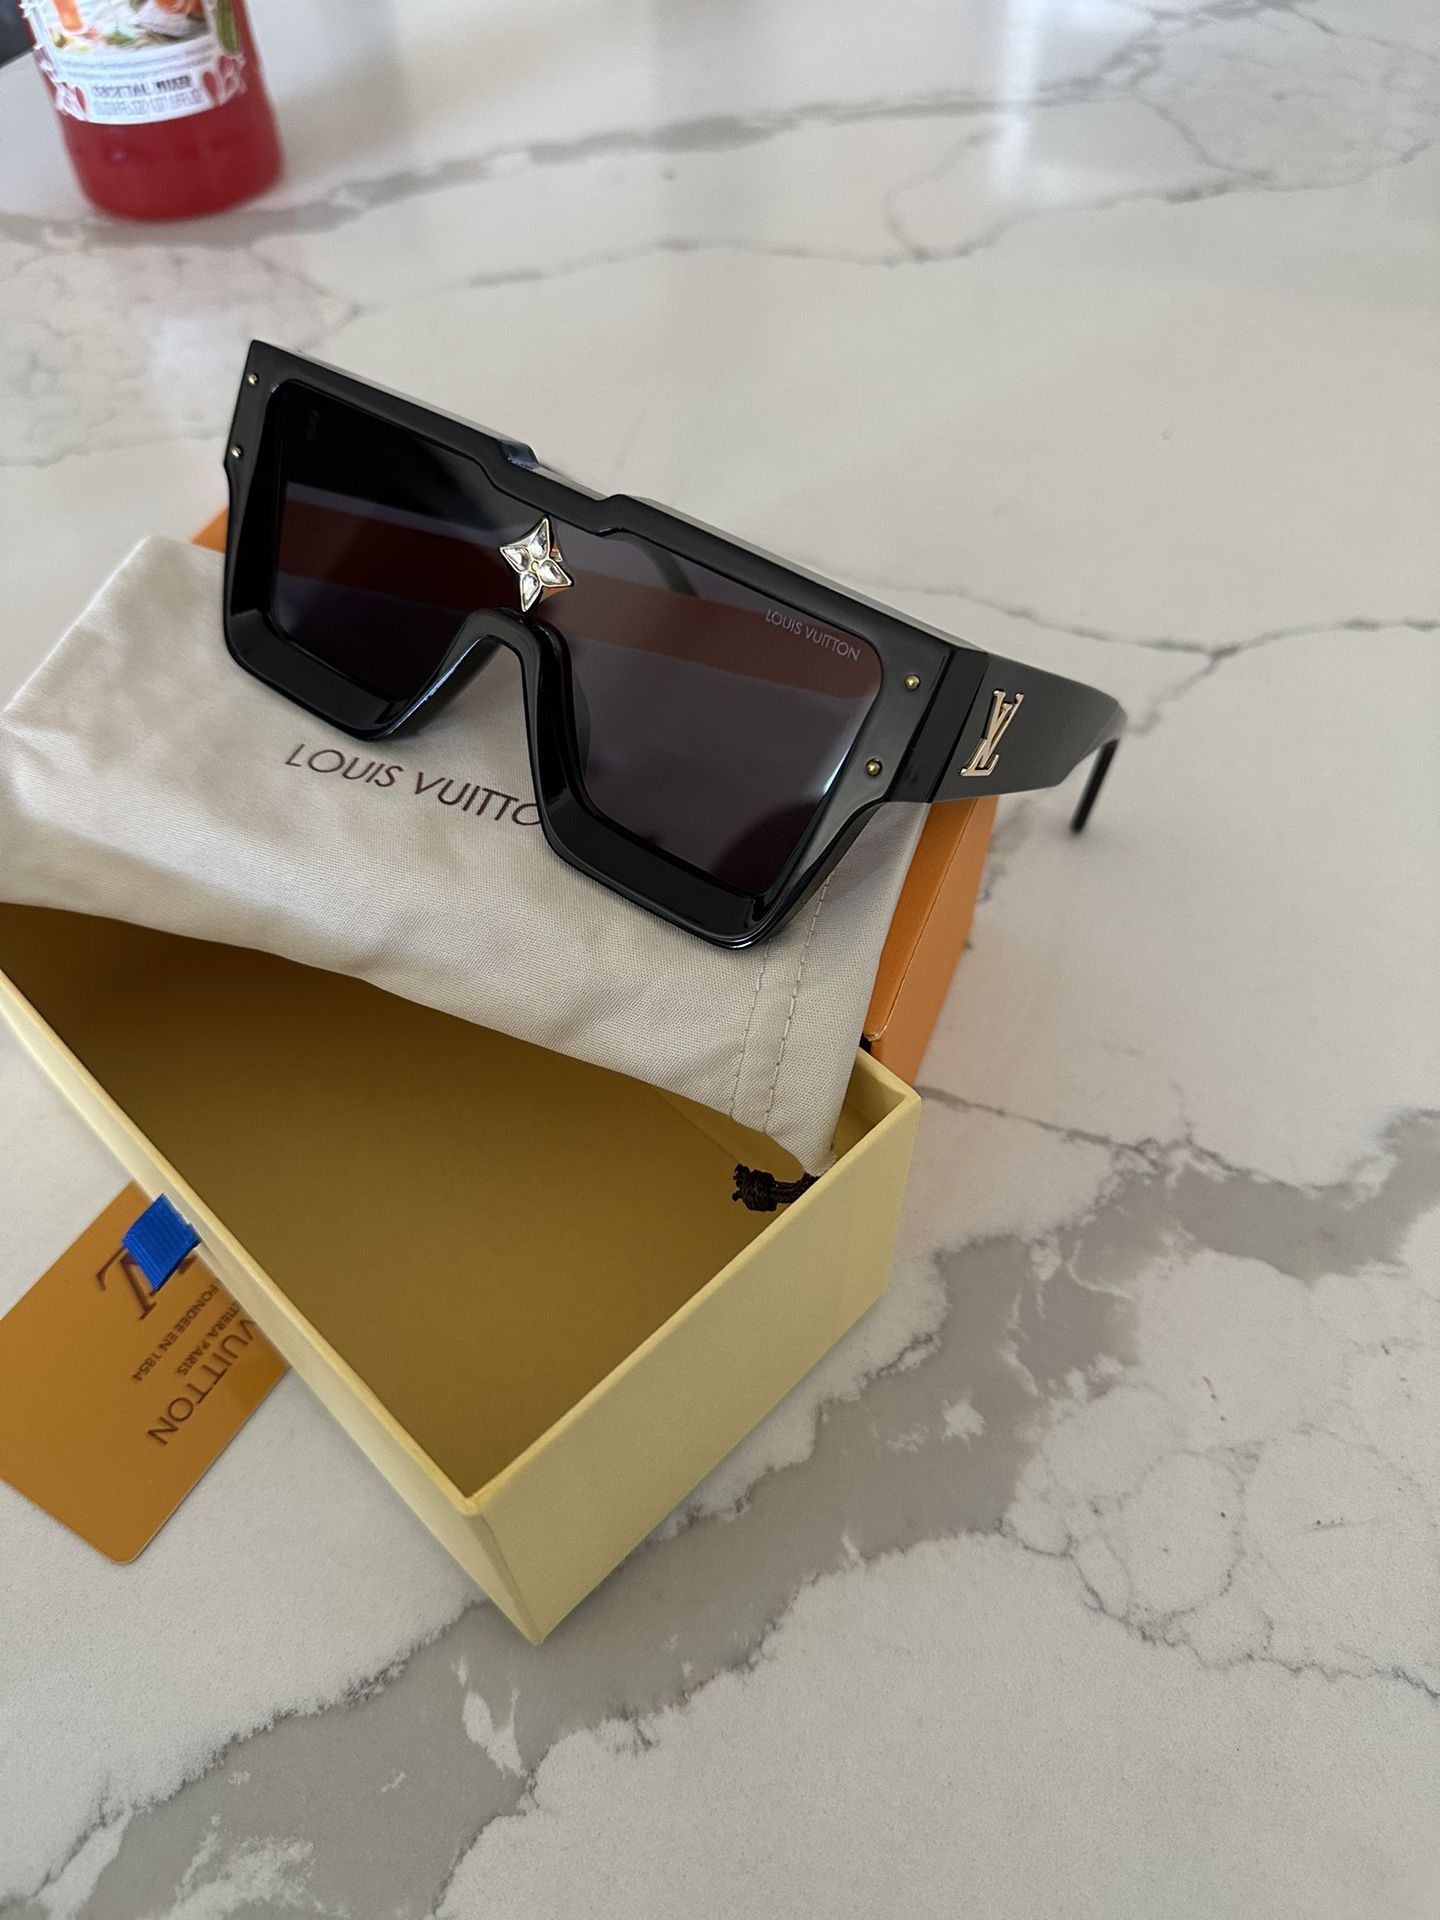 Louis Vuitton Cyclone Sunglasses for Sale in Dearborn Heights, MI - OfferUp